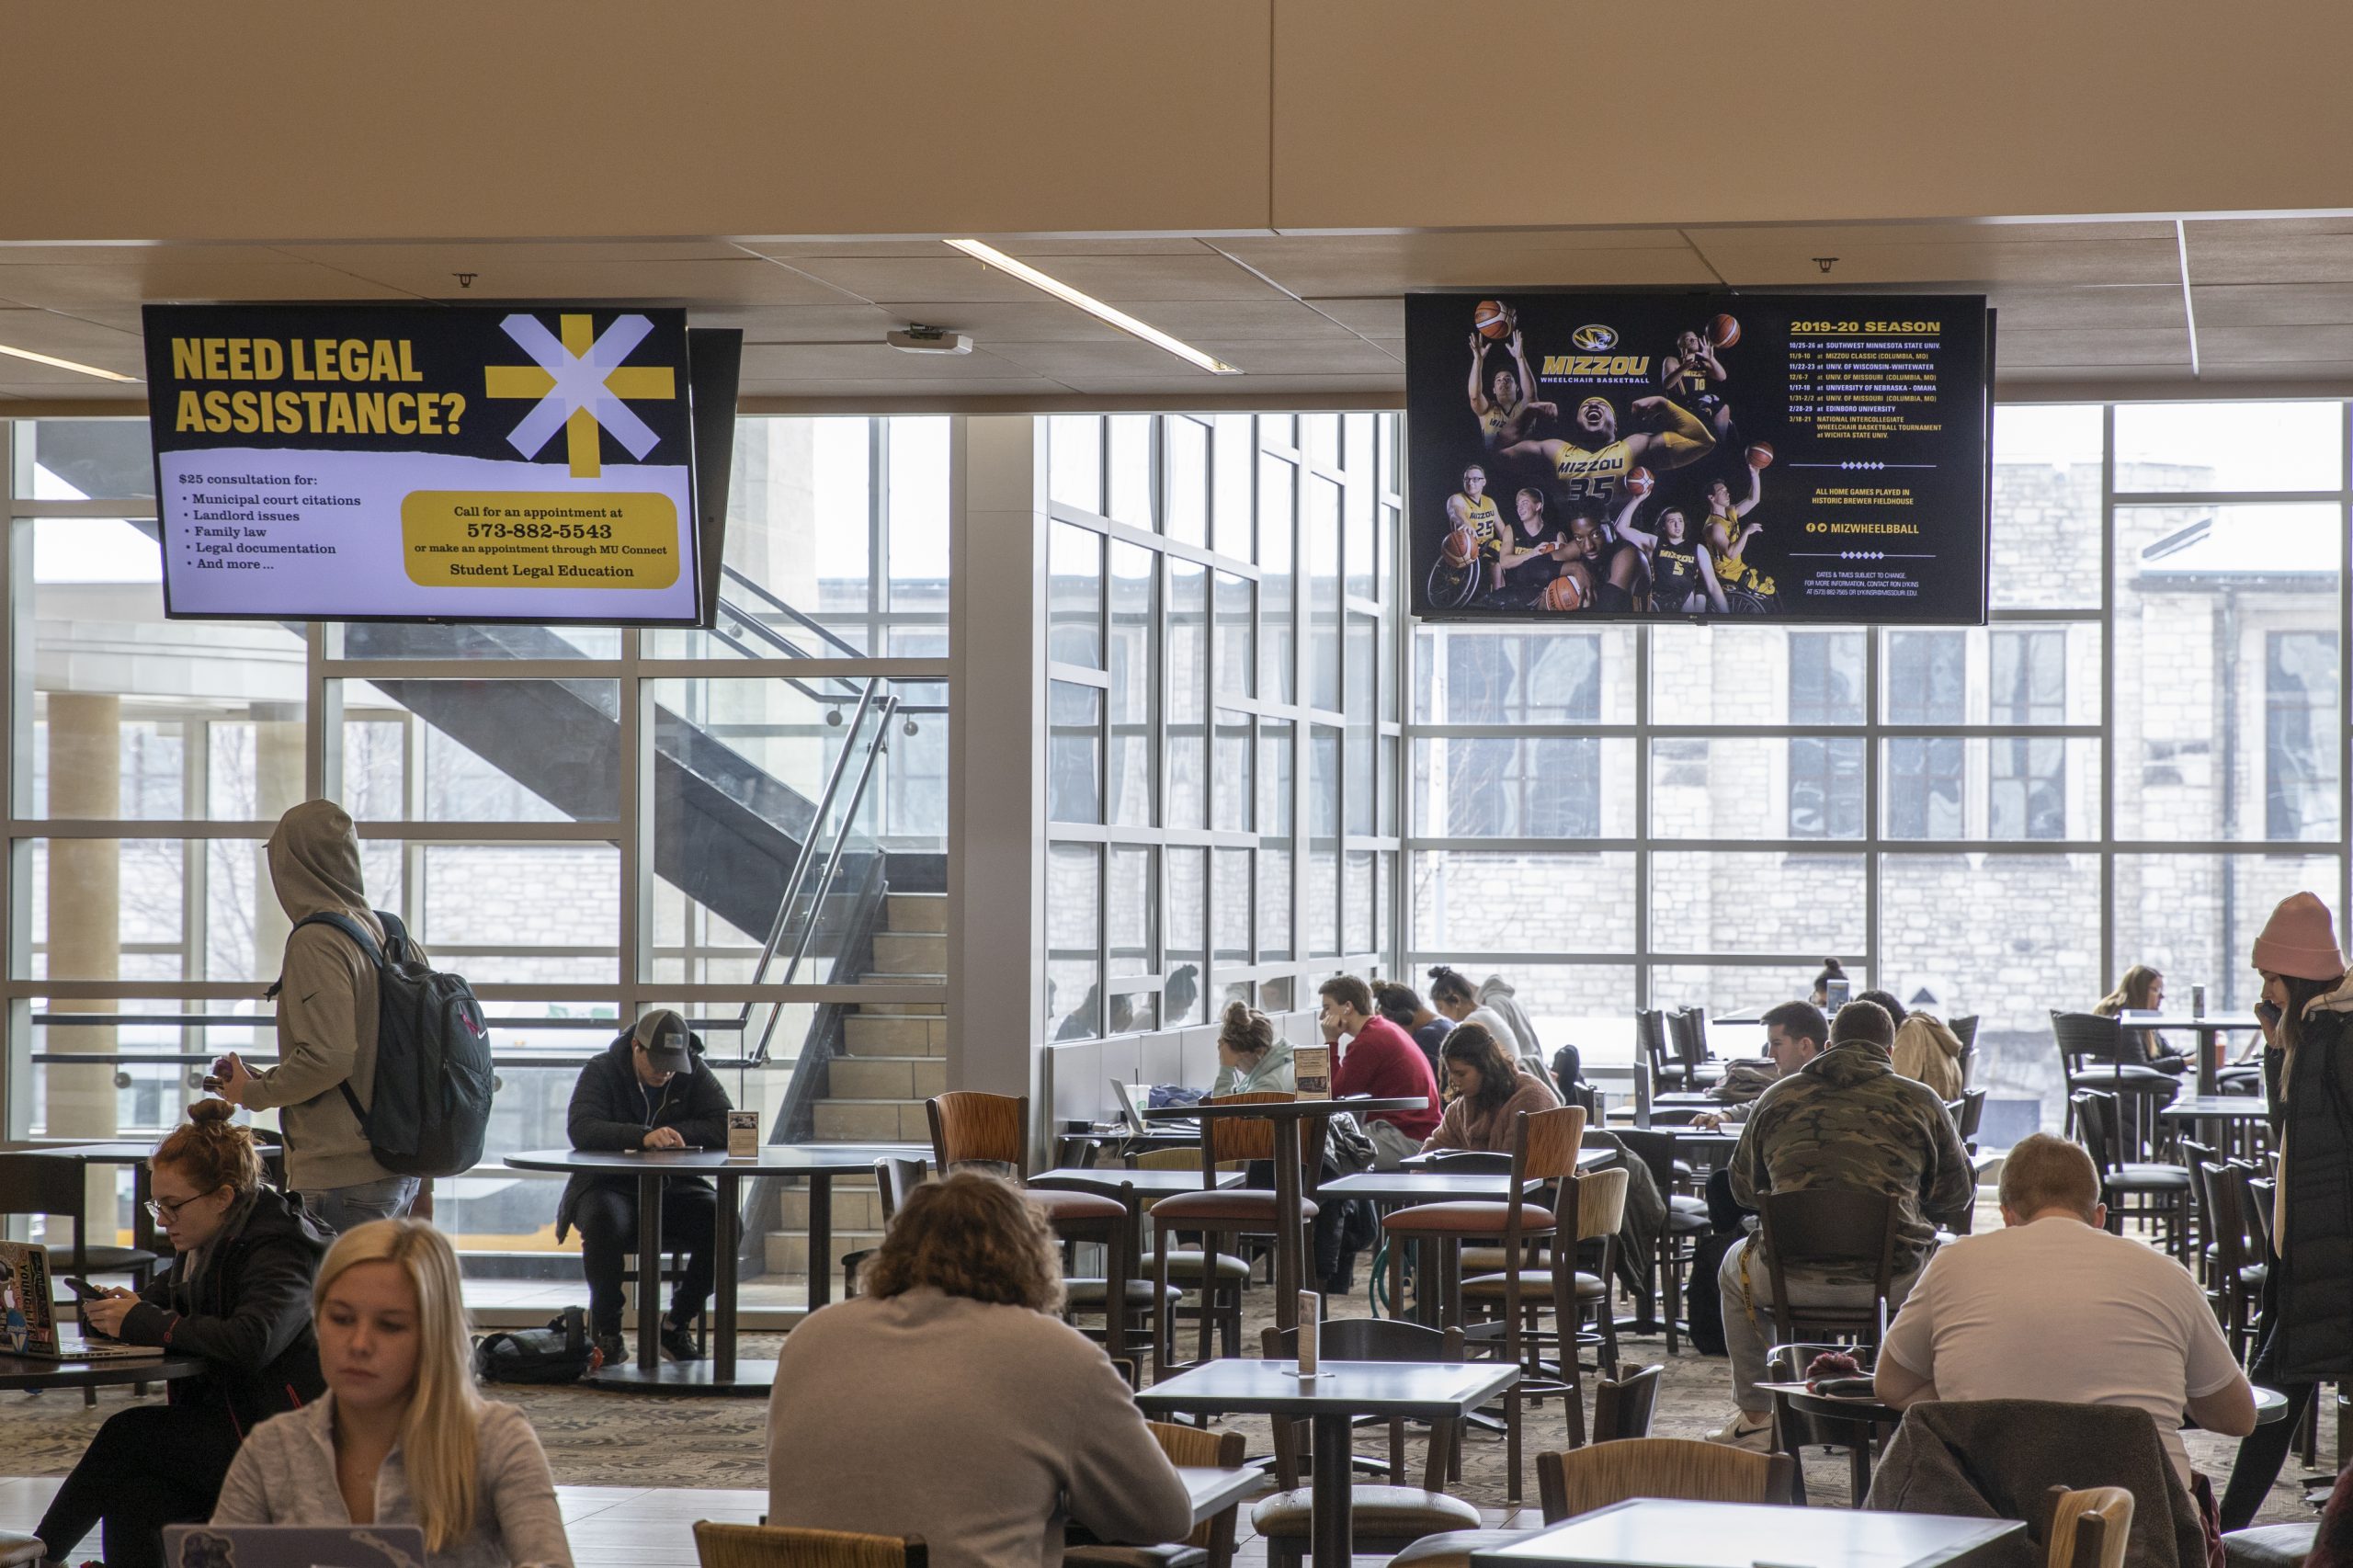 LED Screens at the Student Center